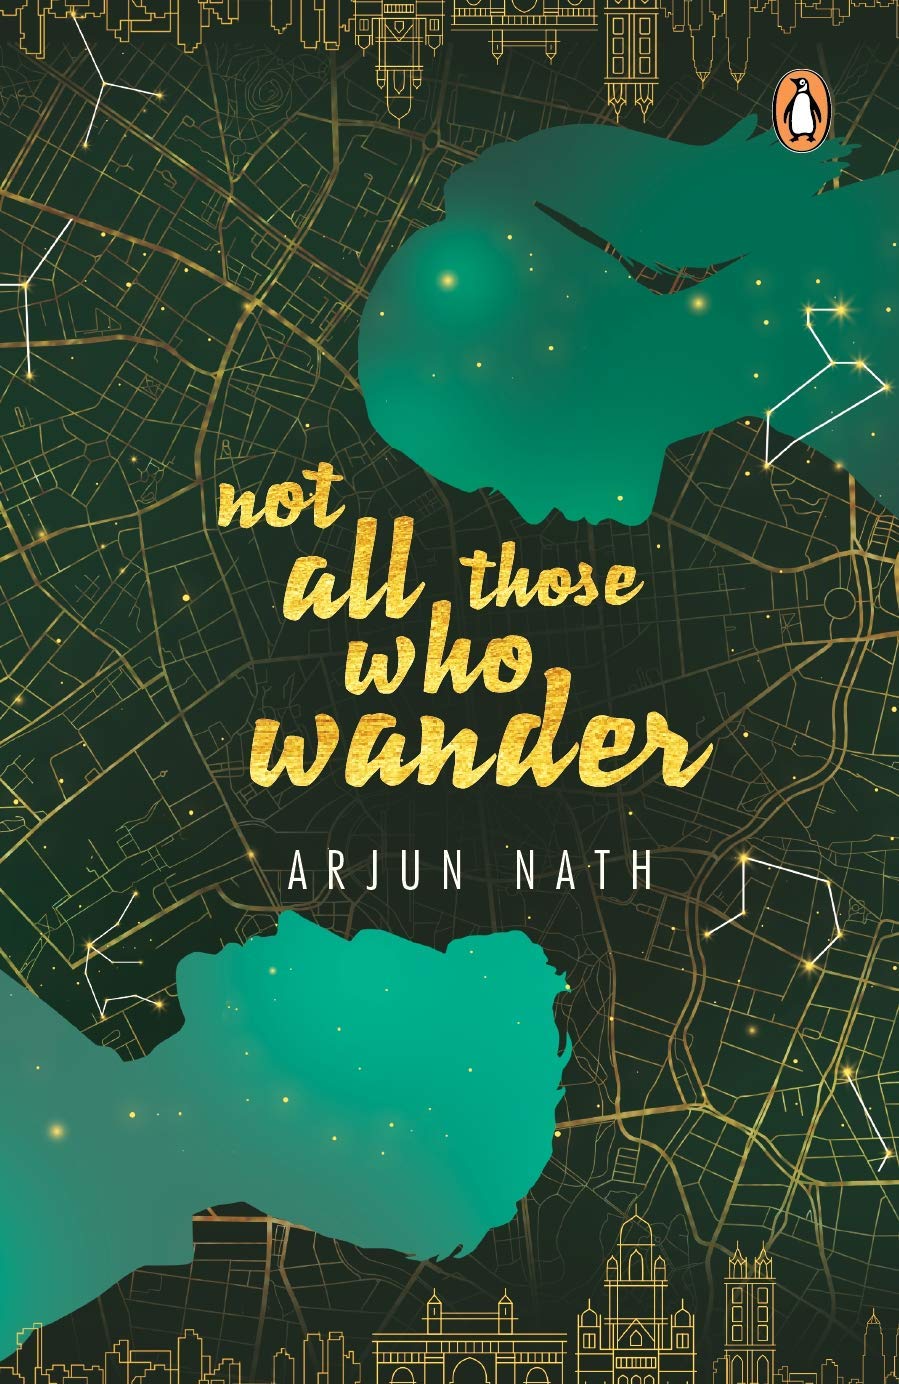 Arjun Nath's "Not All Those Who Wander" is a heartfelt story about Millennial Friendships and Modern-Day Love